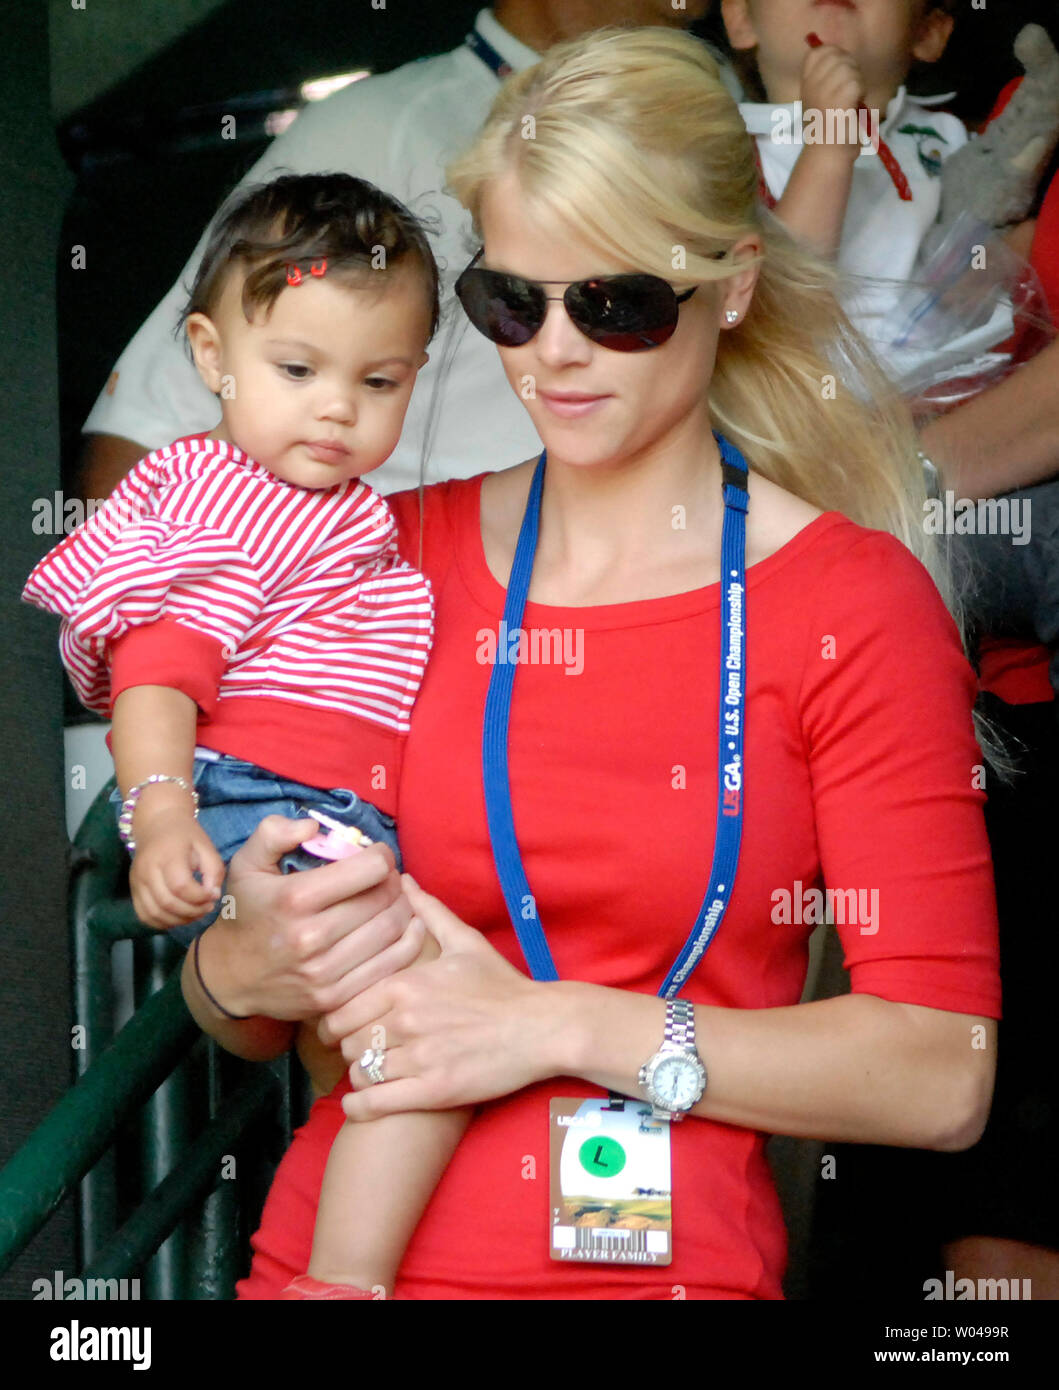 Tiger Woods's wife Elin Nordegren carries their baby girl Sam as they watch Woods putt on the 18th green during the final round of the US Open at Torrey Pines Golf Course in San Diego on June 15, 2008. Woods finished his round tied for first with Rocco Mediate. A playoff round between Woods and Mediate will be held tomorrow. (UPI Photo/Earl Cryer) Stock Photo